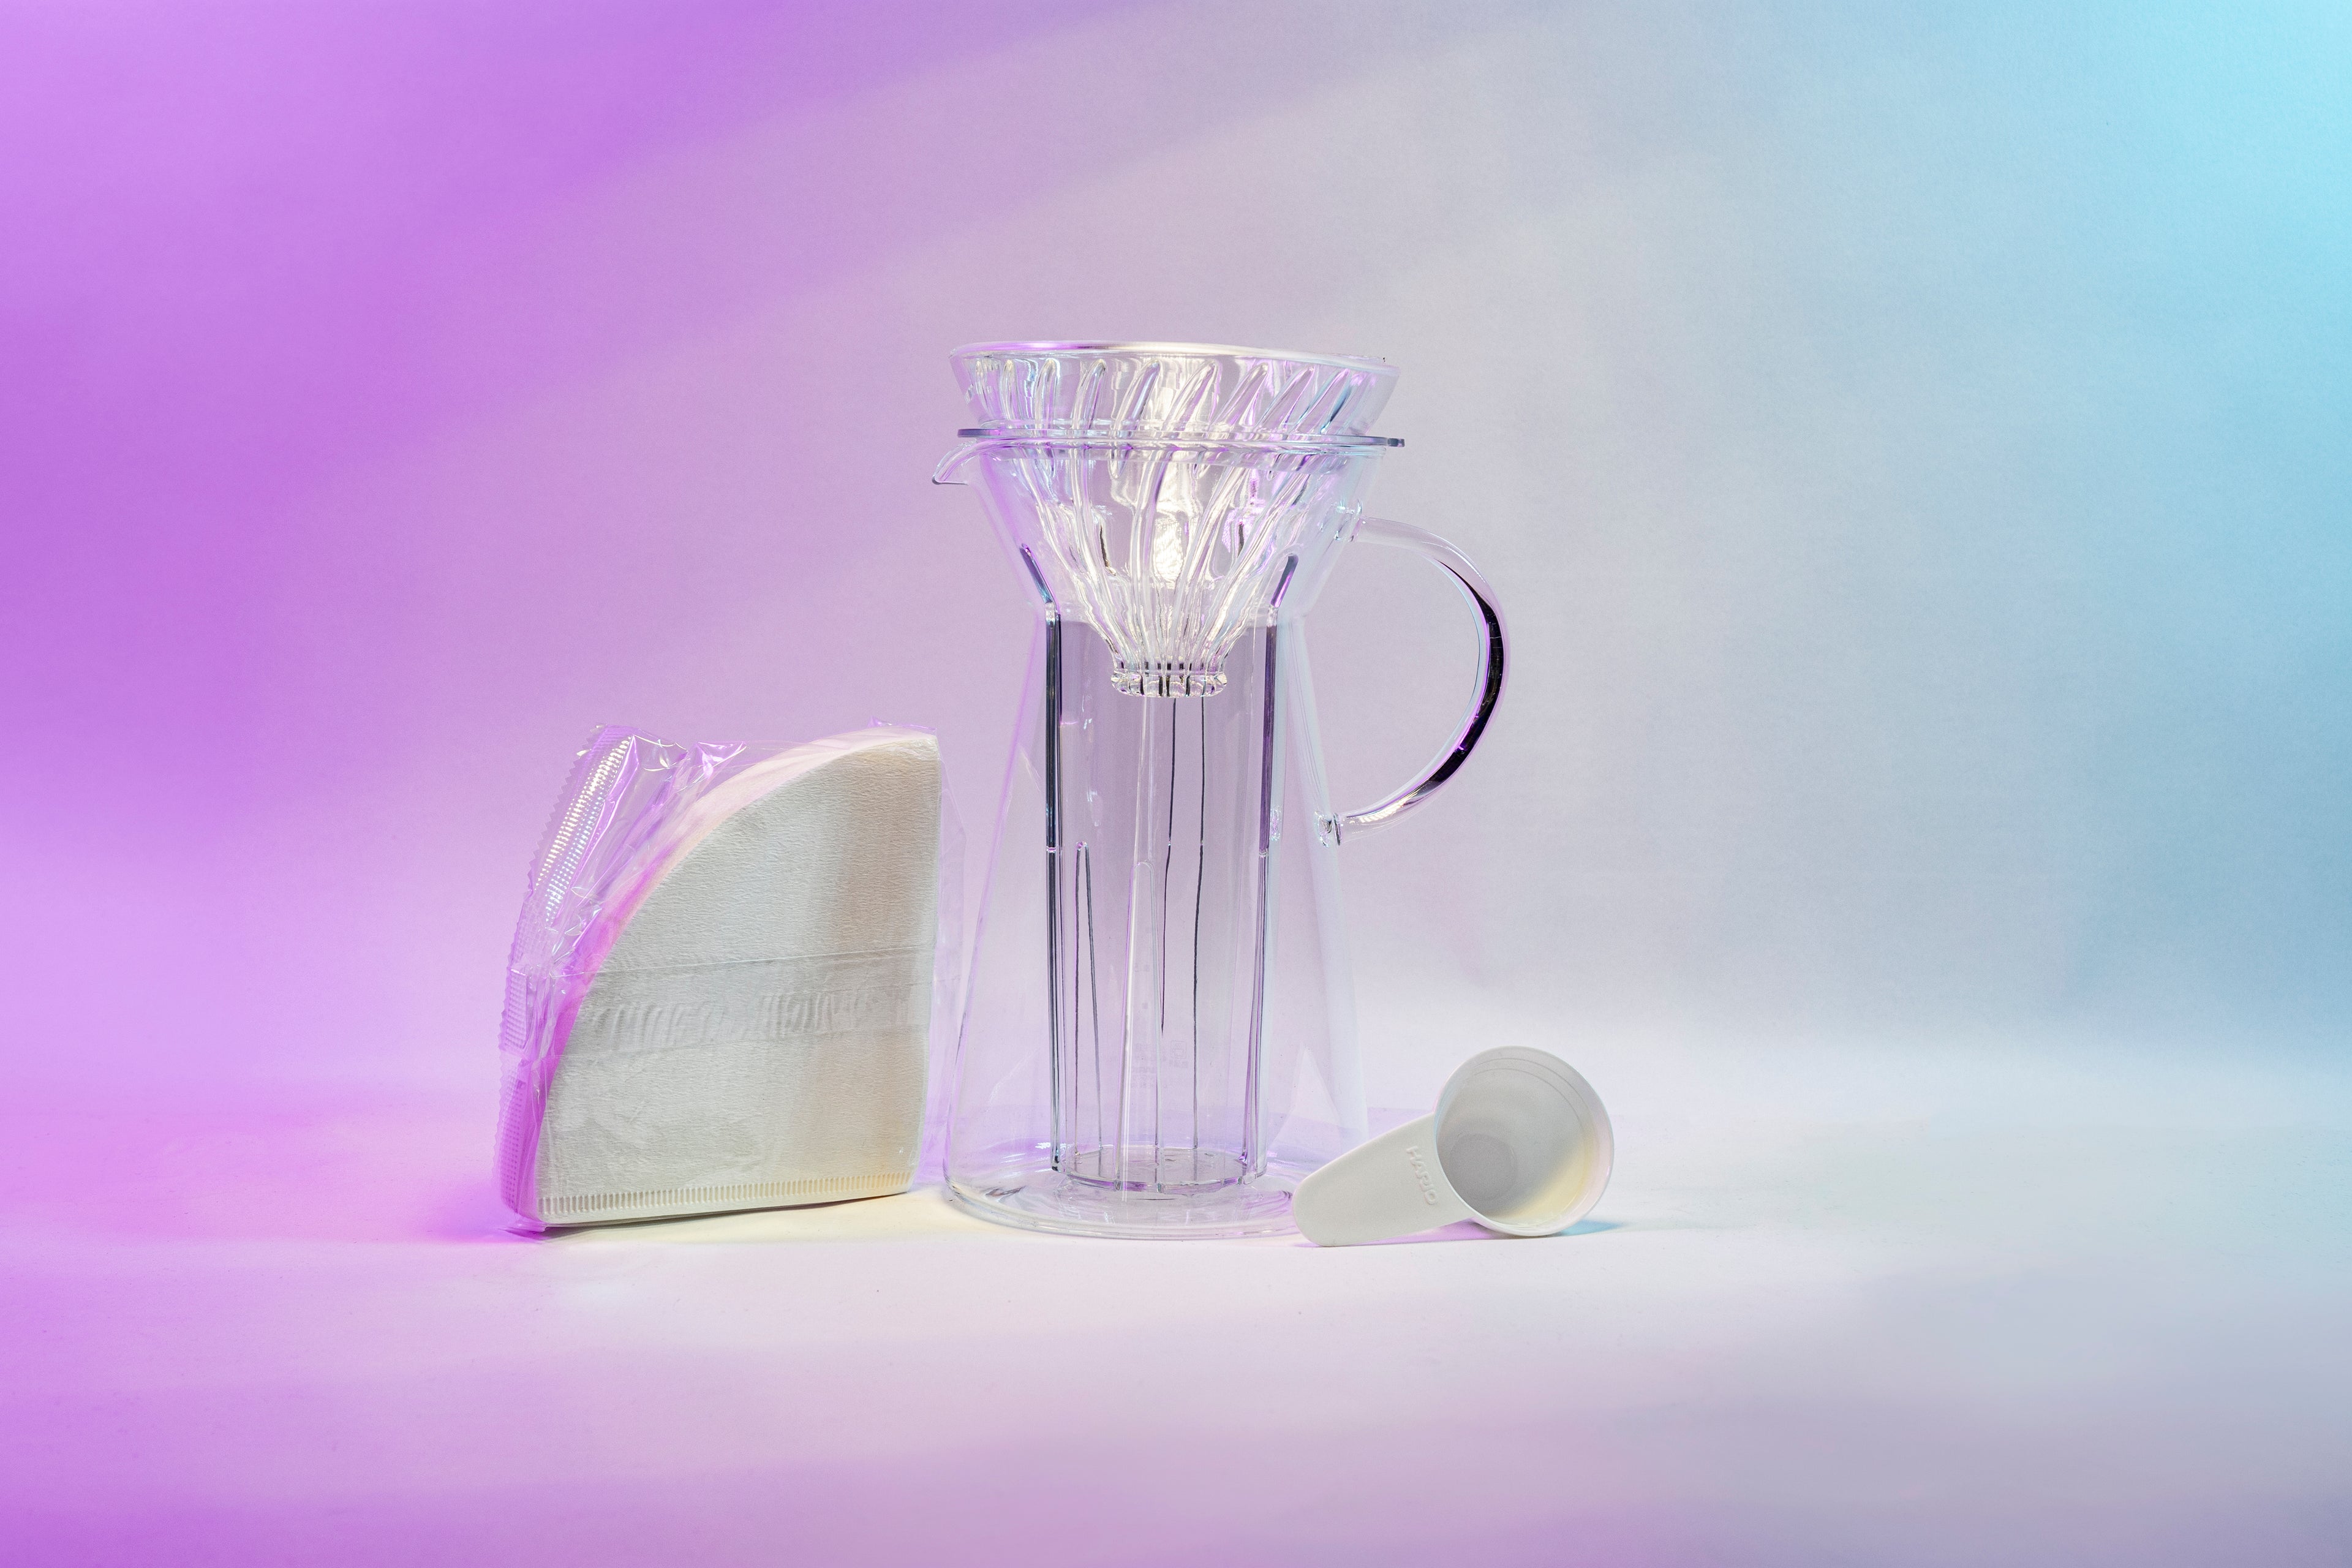 White cone shaped paper filters in a clear plastic bag next to a tapered glass dripper with fluted spout and all glass handle with a cone shaped glass dripper with ribs seated inside, and a white plastic coffee measuring spoon.